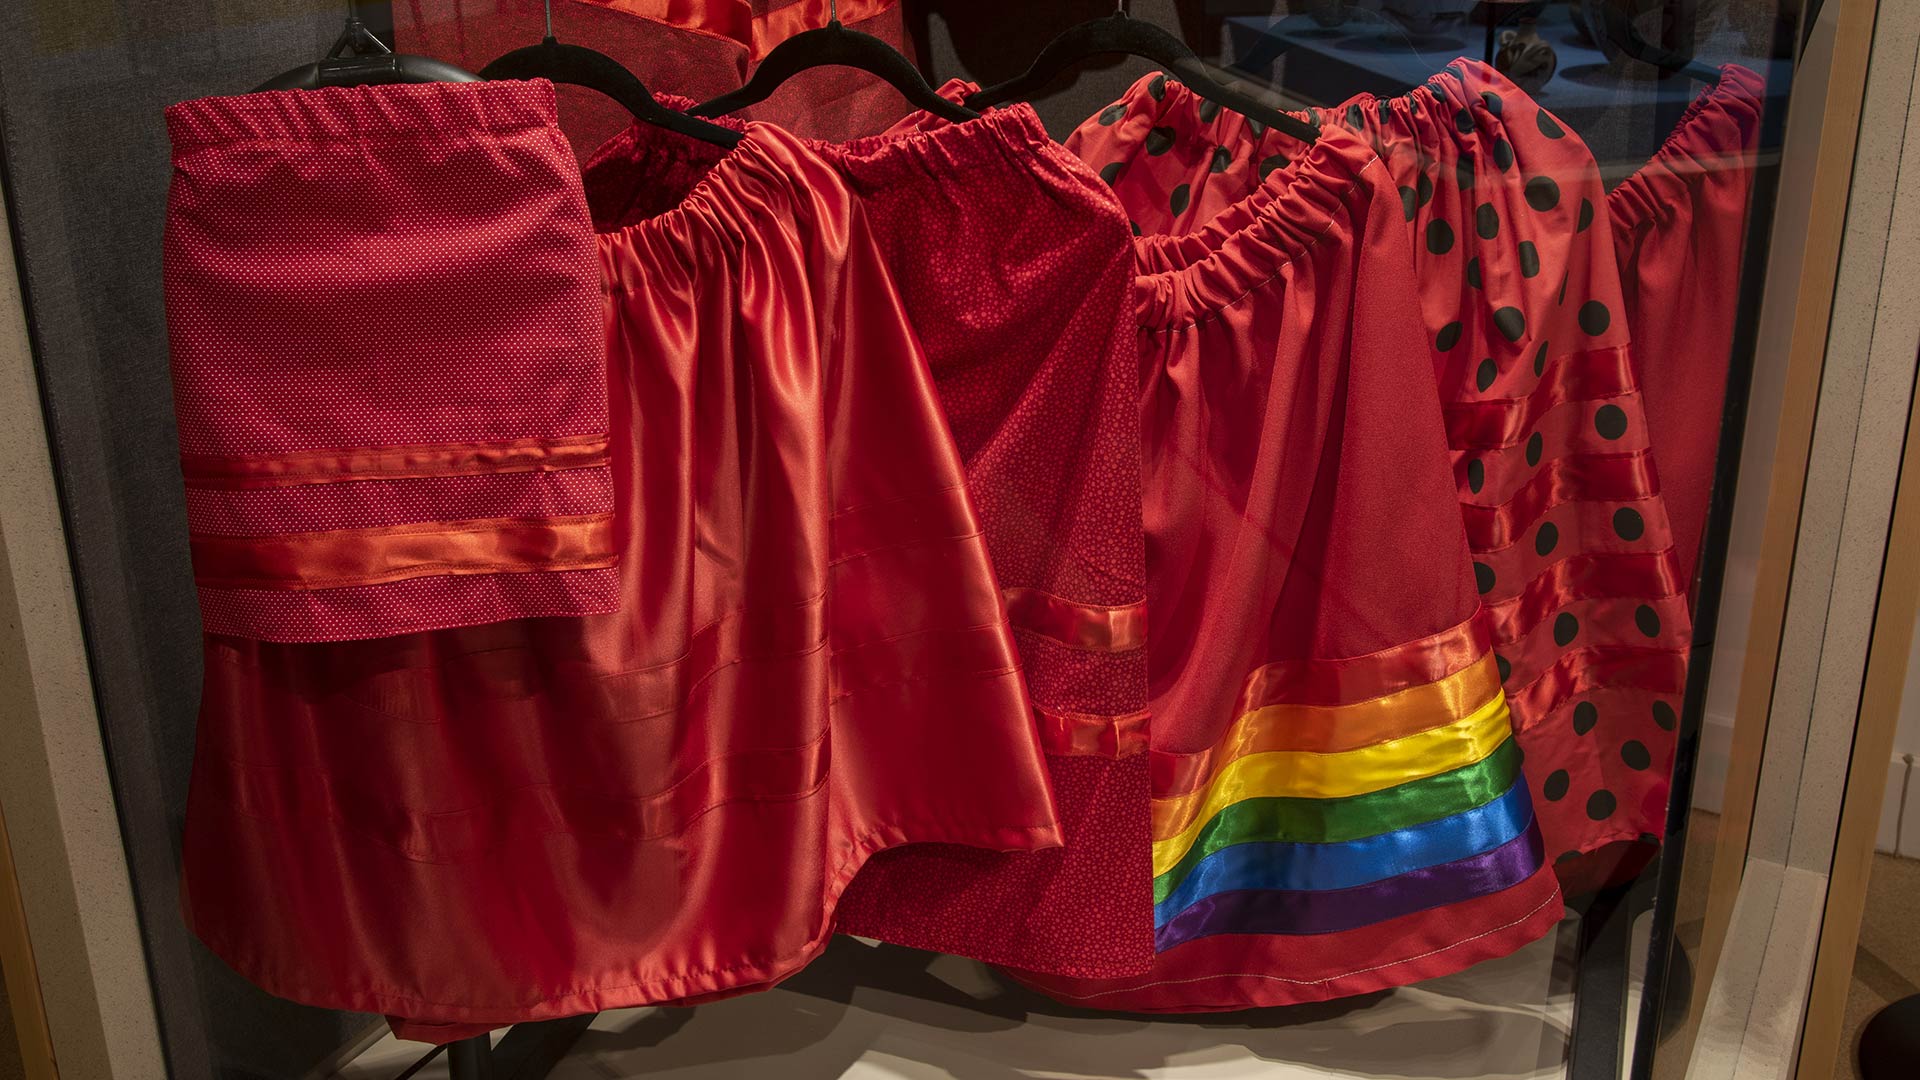 6 modern red garments (skirts and shirts) with various patterns in an exhibit case